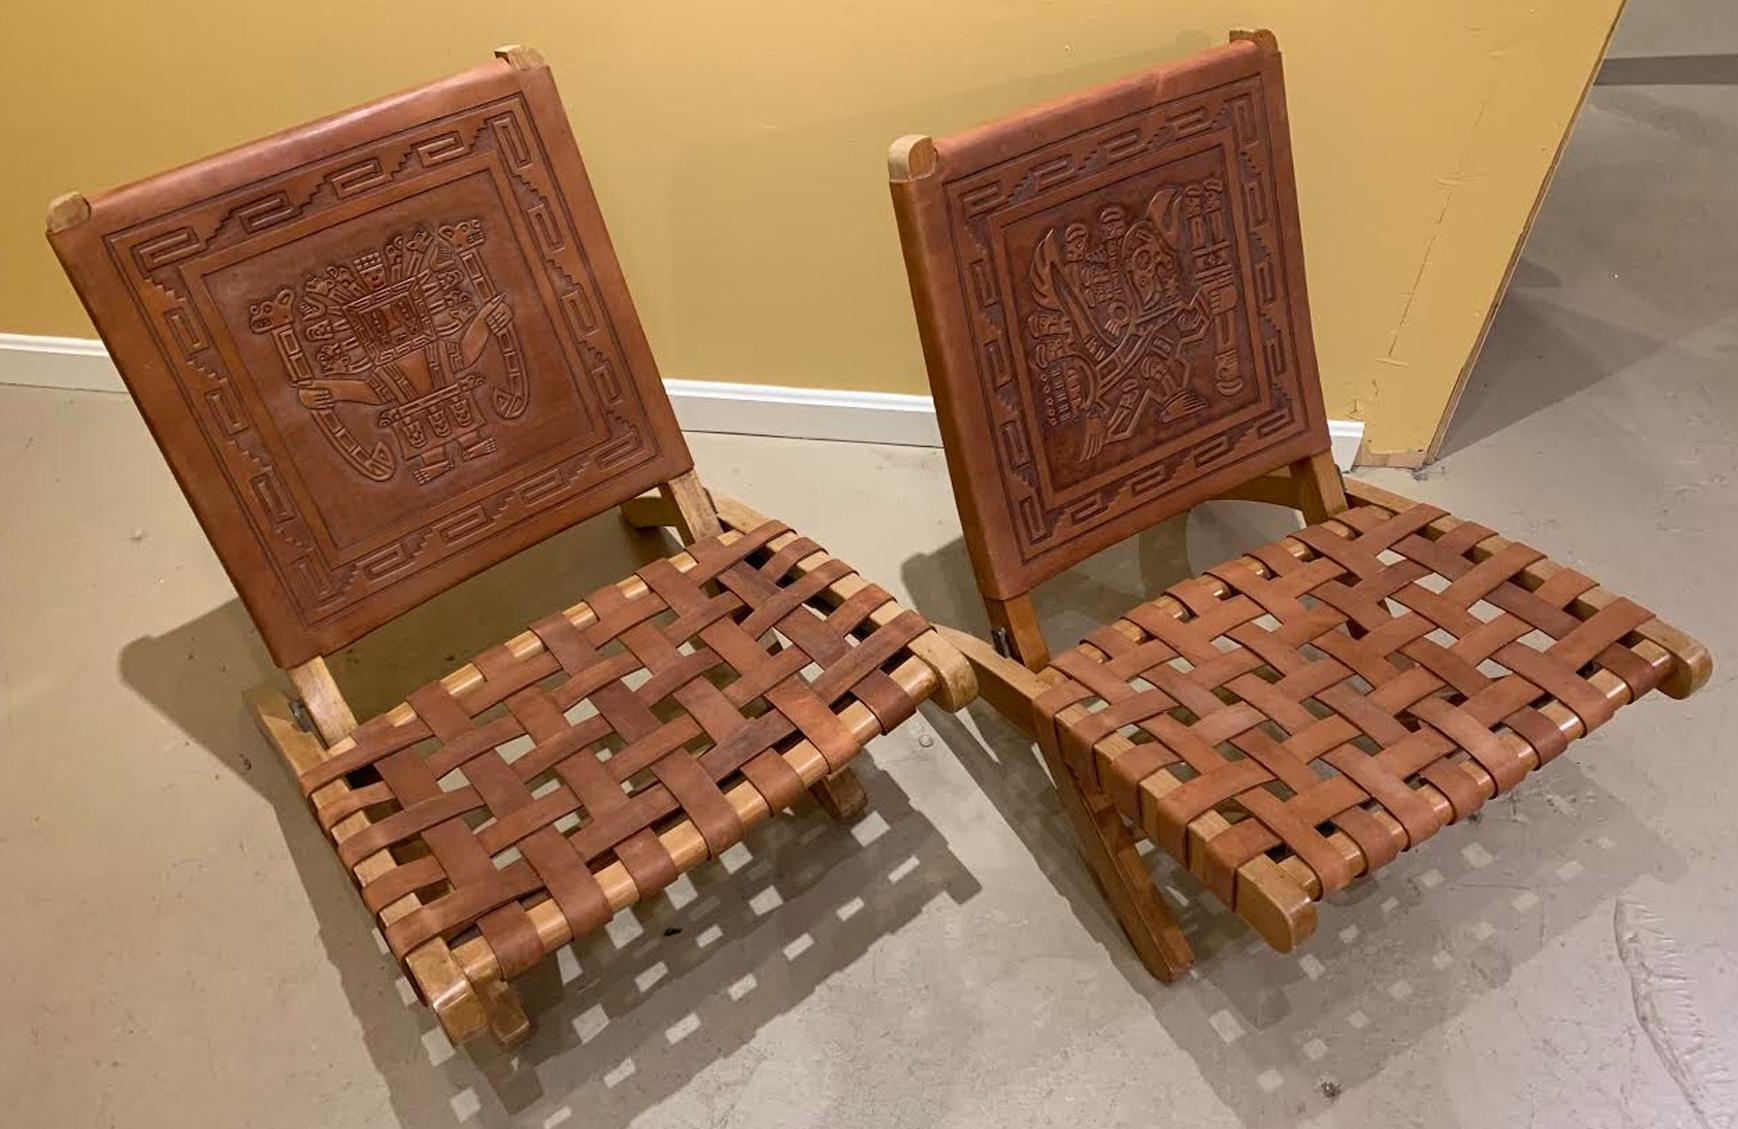 A fine pair of wood and leather folding chairs from Peru, decorated with tooled Aztec decoration on the leather backs, and include leather woven seats. The chairs date to the 1970s and are in very good overall condition, with minor imperfections and